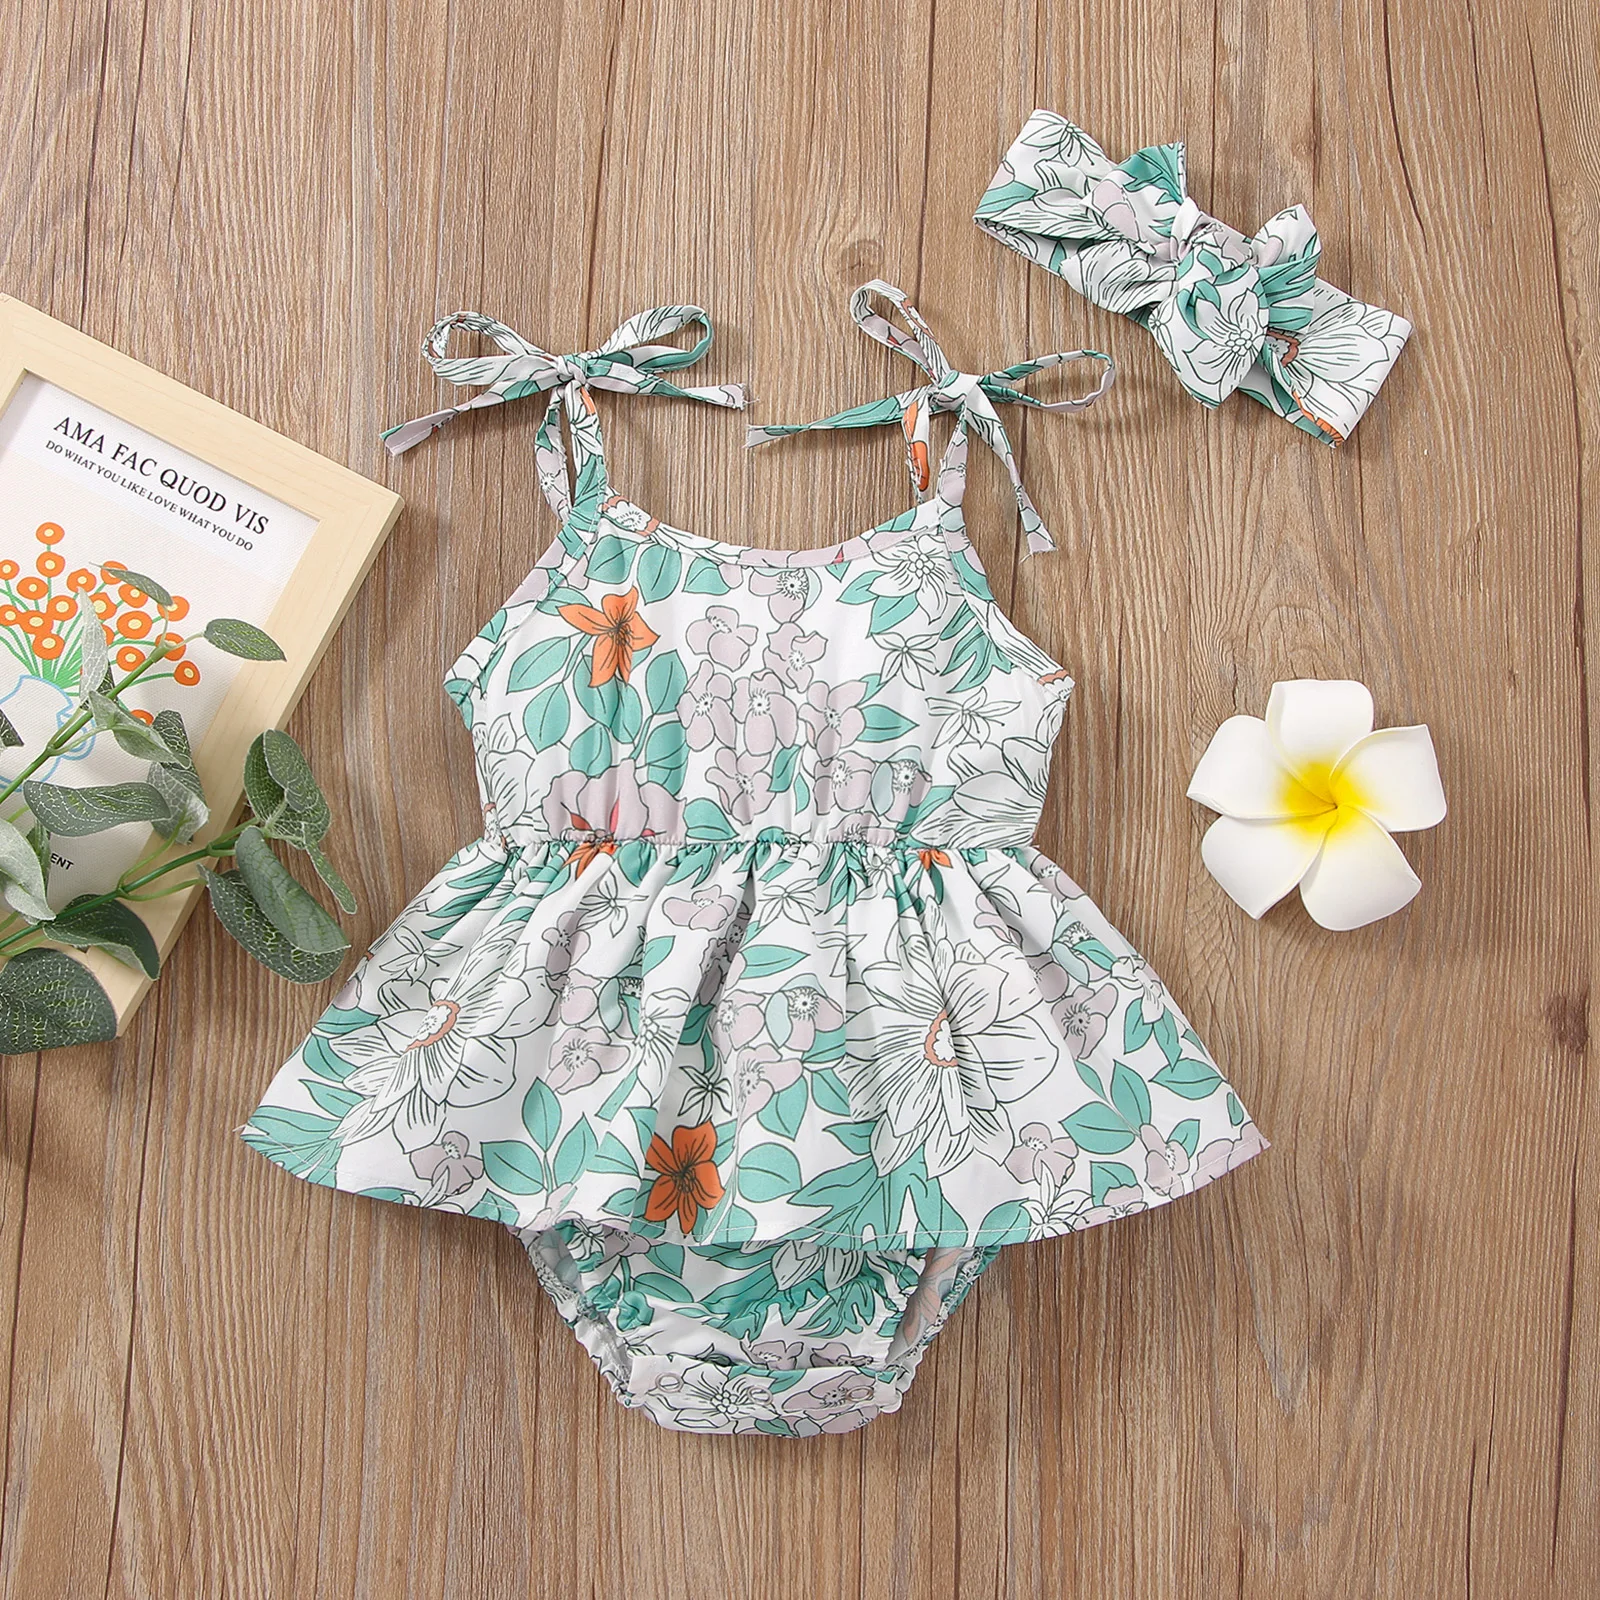 Baby Bodysuits expensive Infant Baby Girls Romper Dress Sweet Floral Sleeveless Bandage Spaghetti Shoulder Strap Jumpsuits with Headband cheap baby bodysuits	